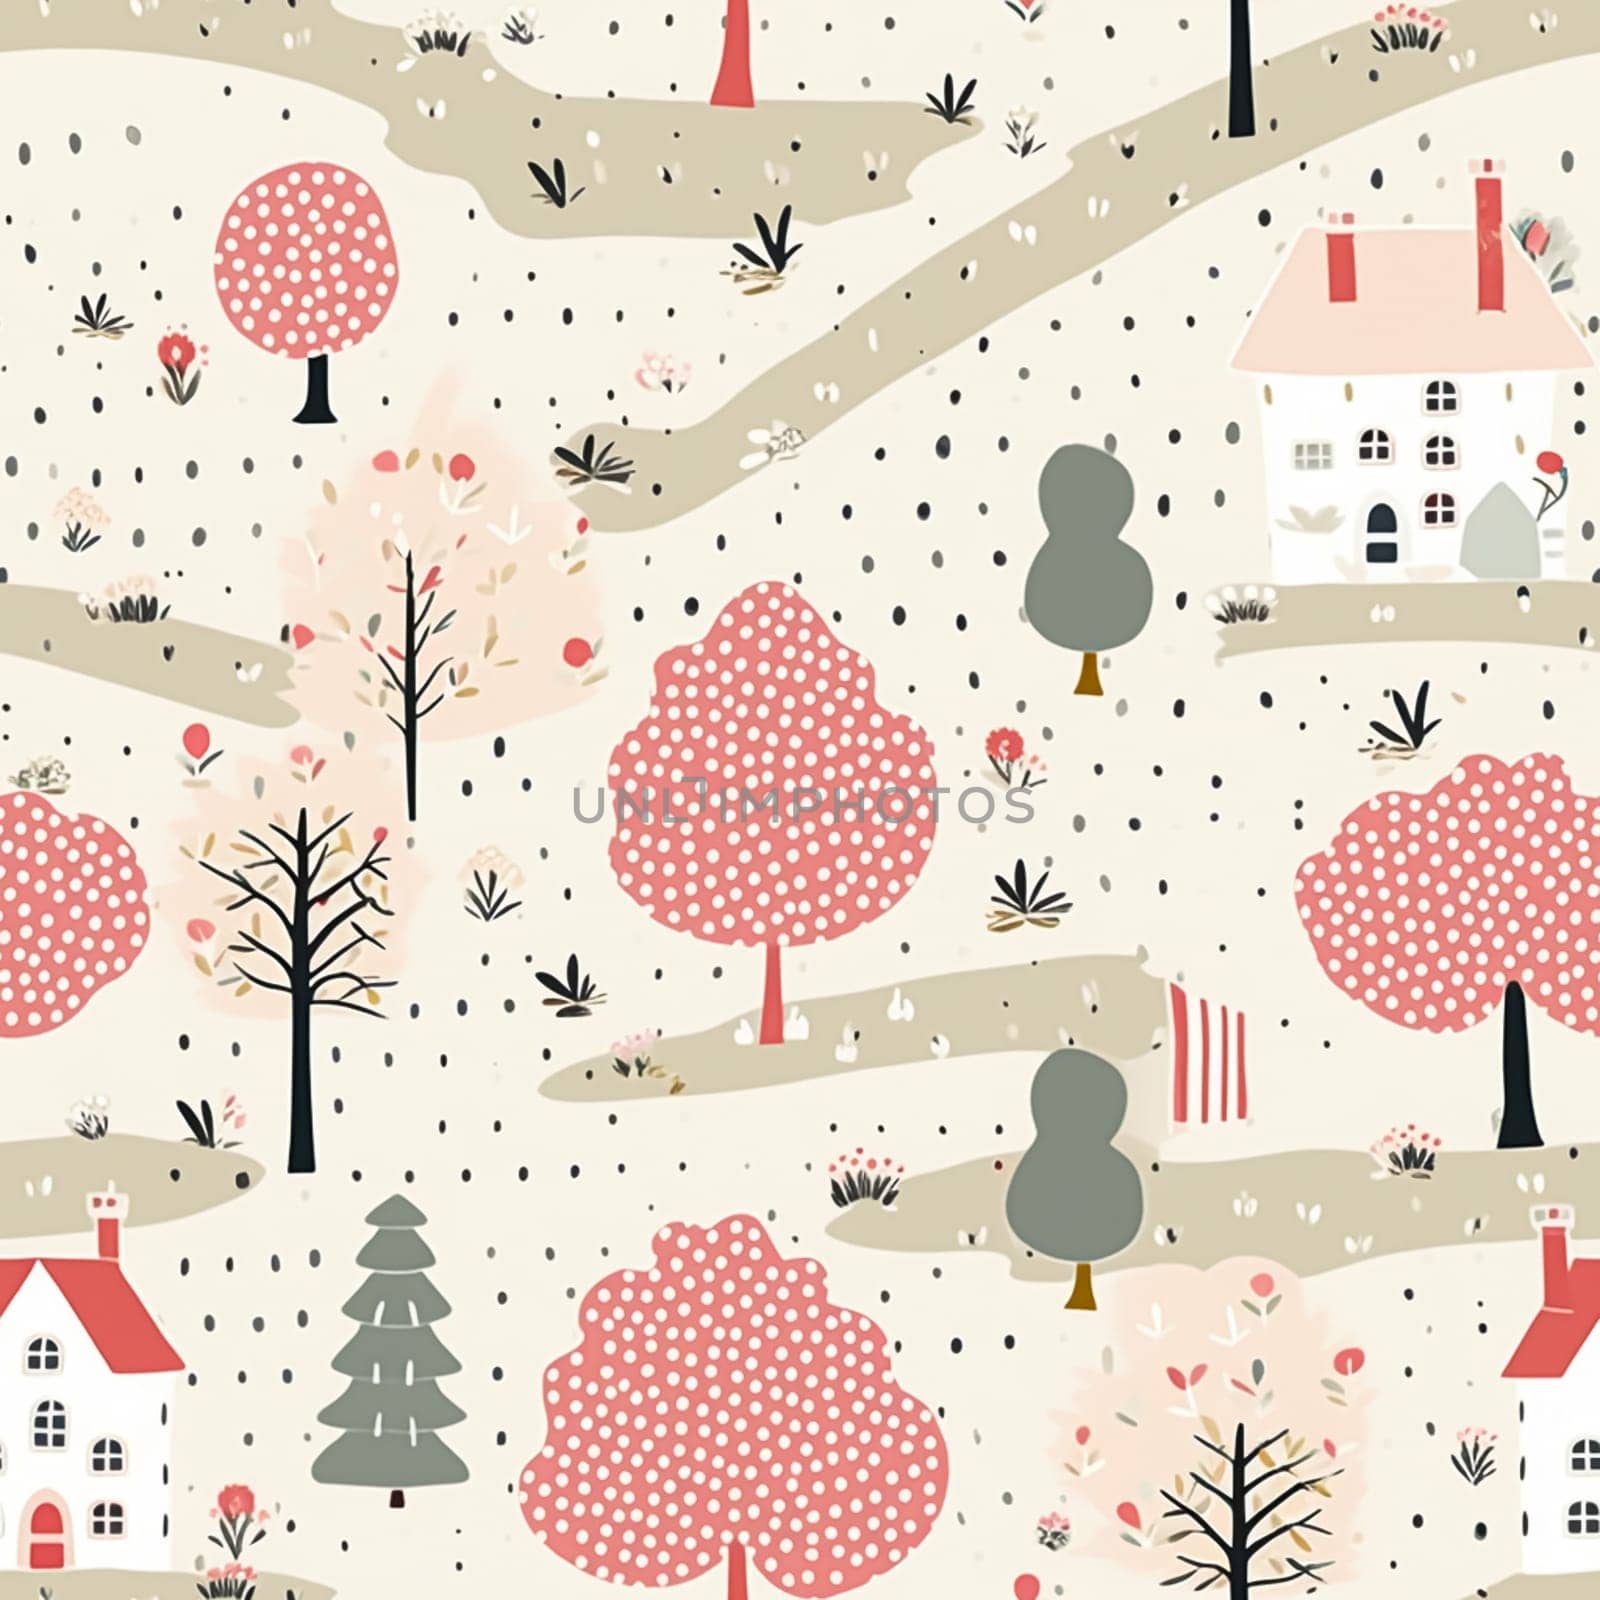 Seamless pattern, tileable autumnal pink country cottage print for wallpaper, wrapping paper, scrapbook, fabric and product design inspiration